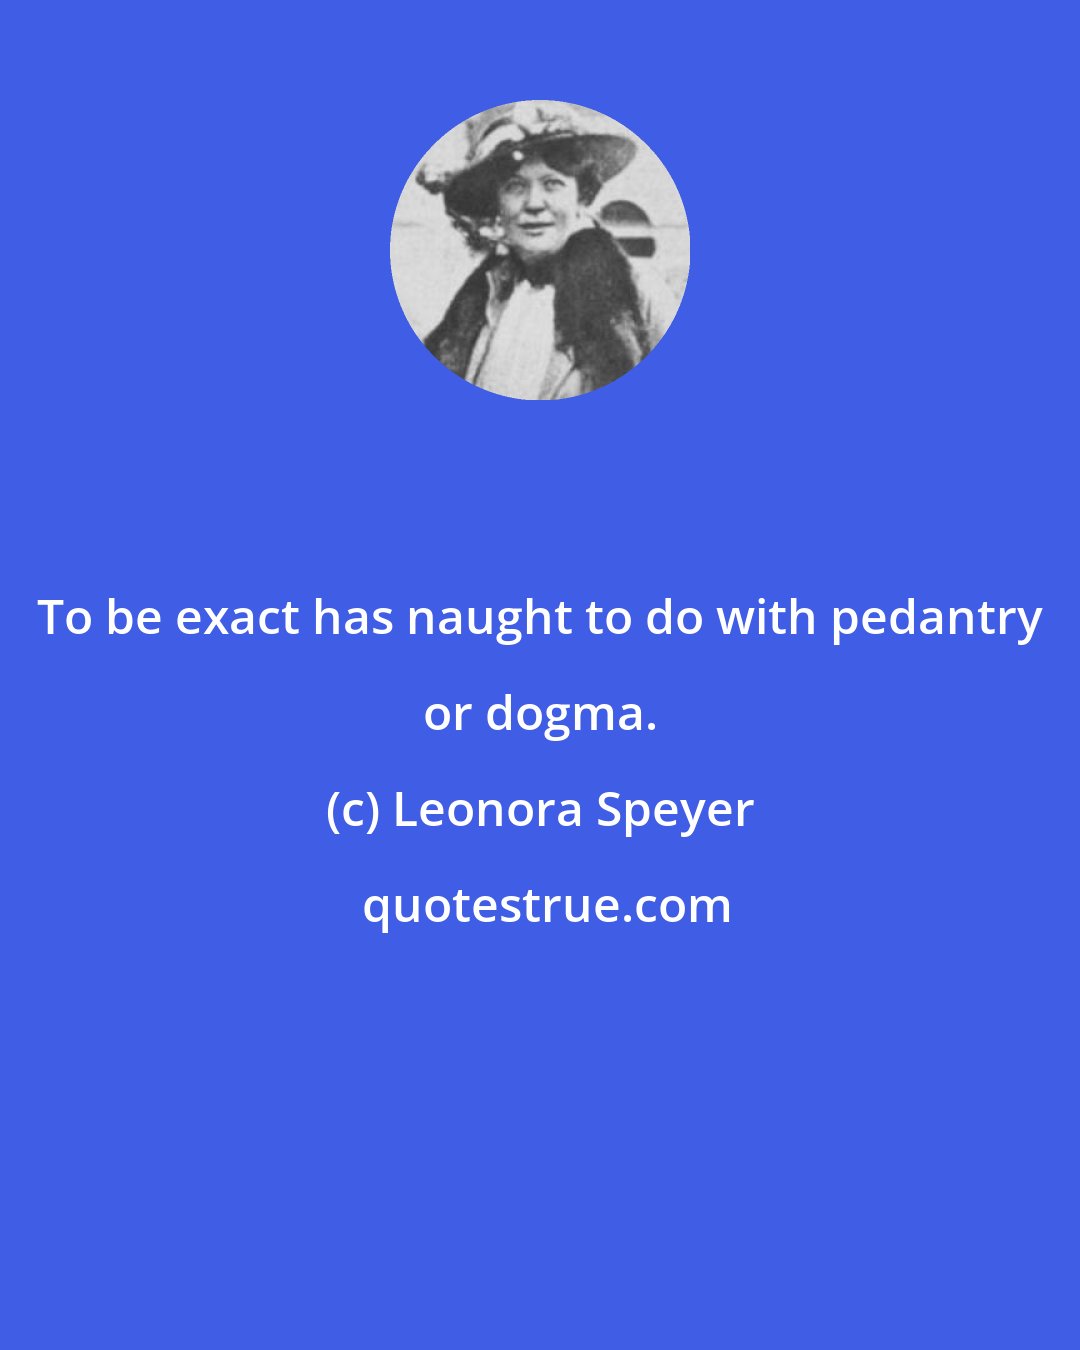 Leonora Speyer: To be exact has naught to do with pedantry or dogma.